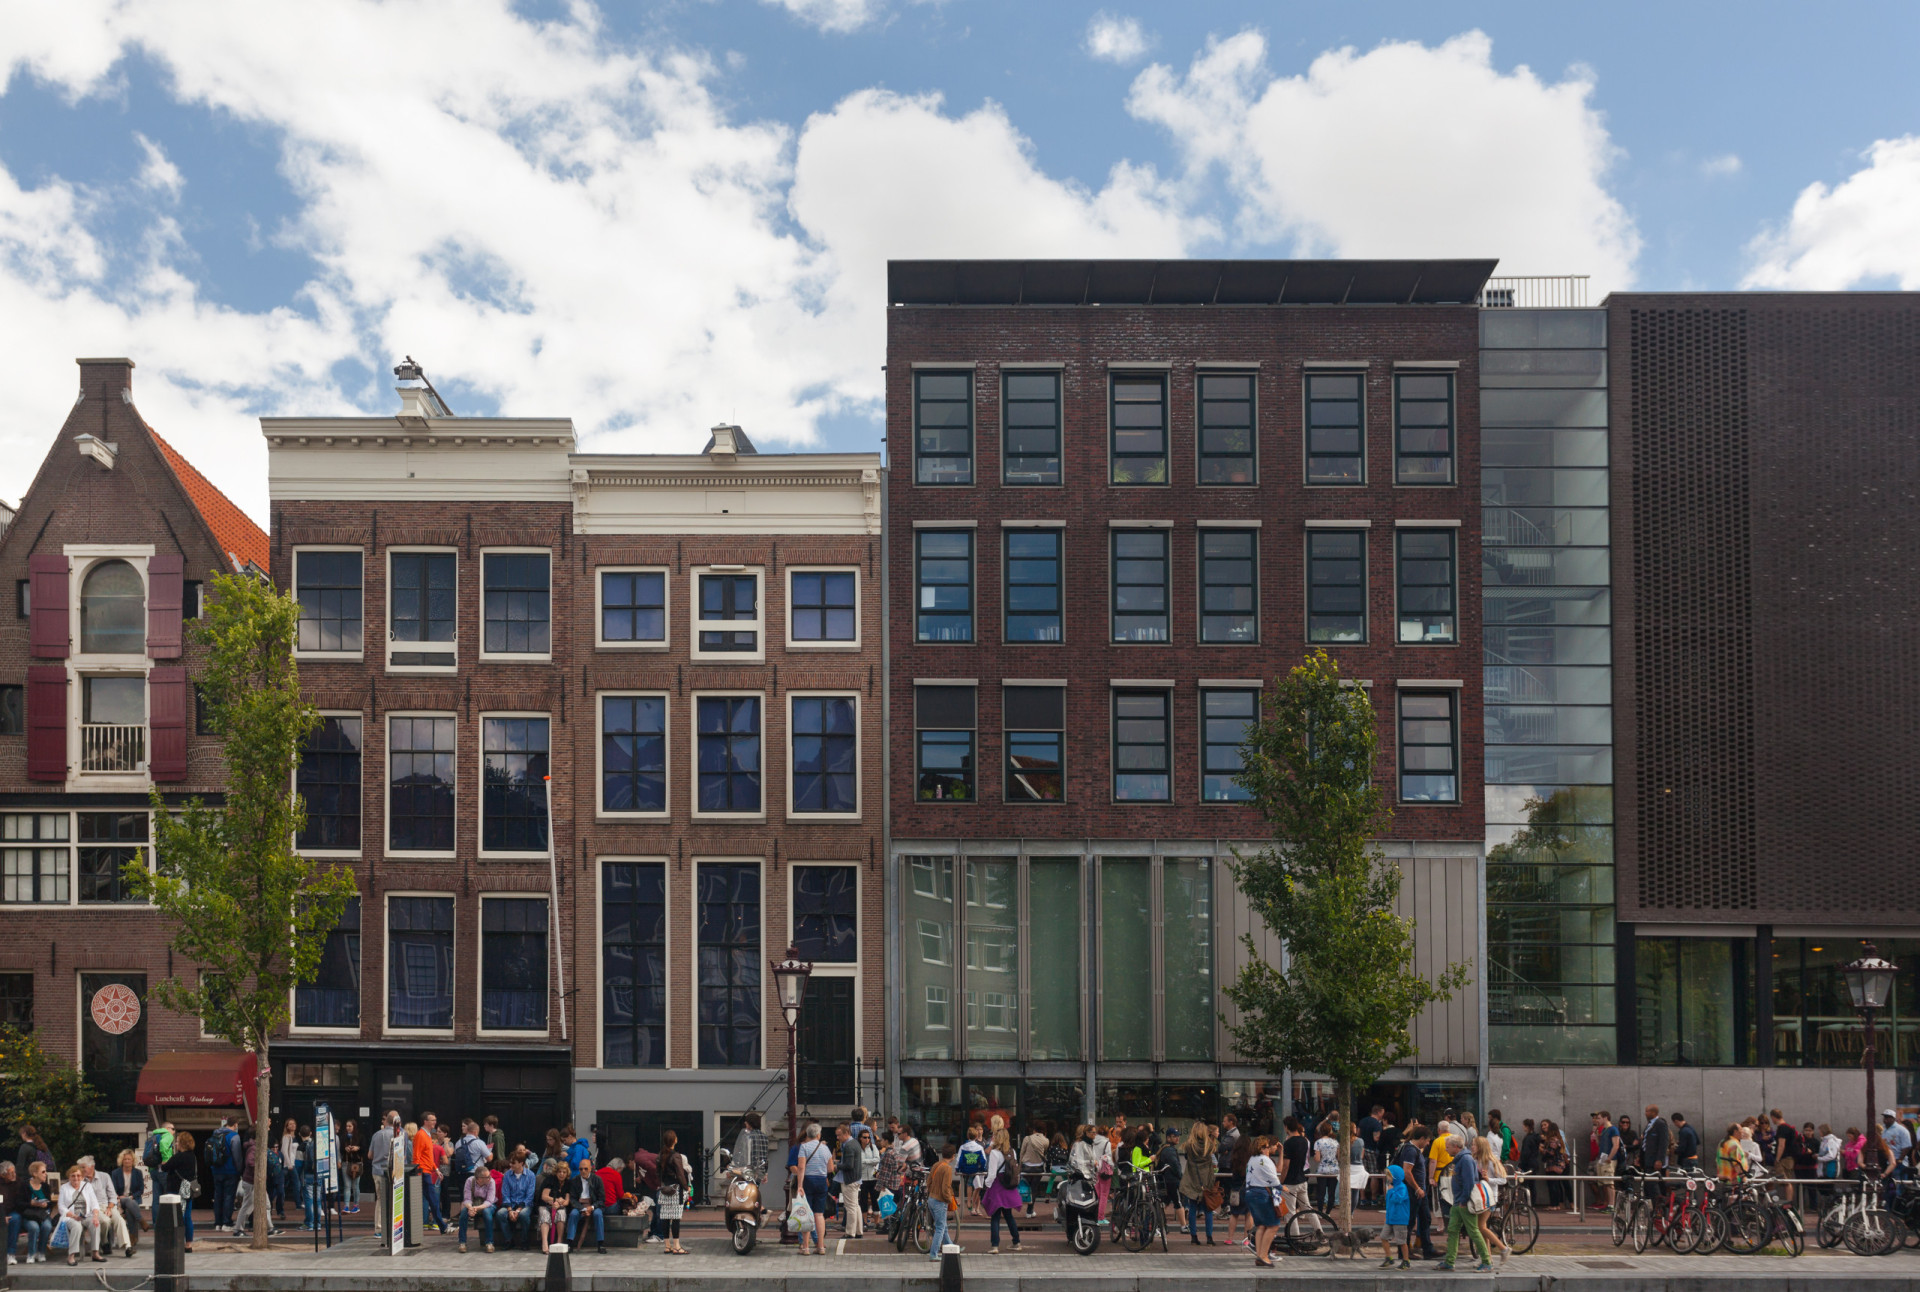 <p>Anne Frank House is a popular tourist spot in <a href="https://www.starsinsider.com/travel/460707/adventuring-in-amazing-amsterdam" rel="noopener">Amsterdam</a> where visitors should stay vigilant of pickpockets. The Red Light District is also an area to be cautious of.</p><p>You may also like:<a href="https://www.starsinsider.com/n/420804?utm_source=msn.com&utm_medium=display&utm_campaign=referral_description&utm_content=717448en-us"> The greatest basketball players of all time</a></p>